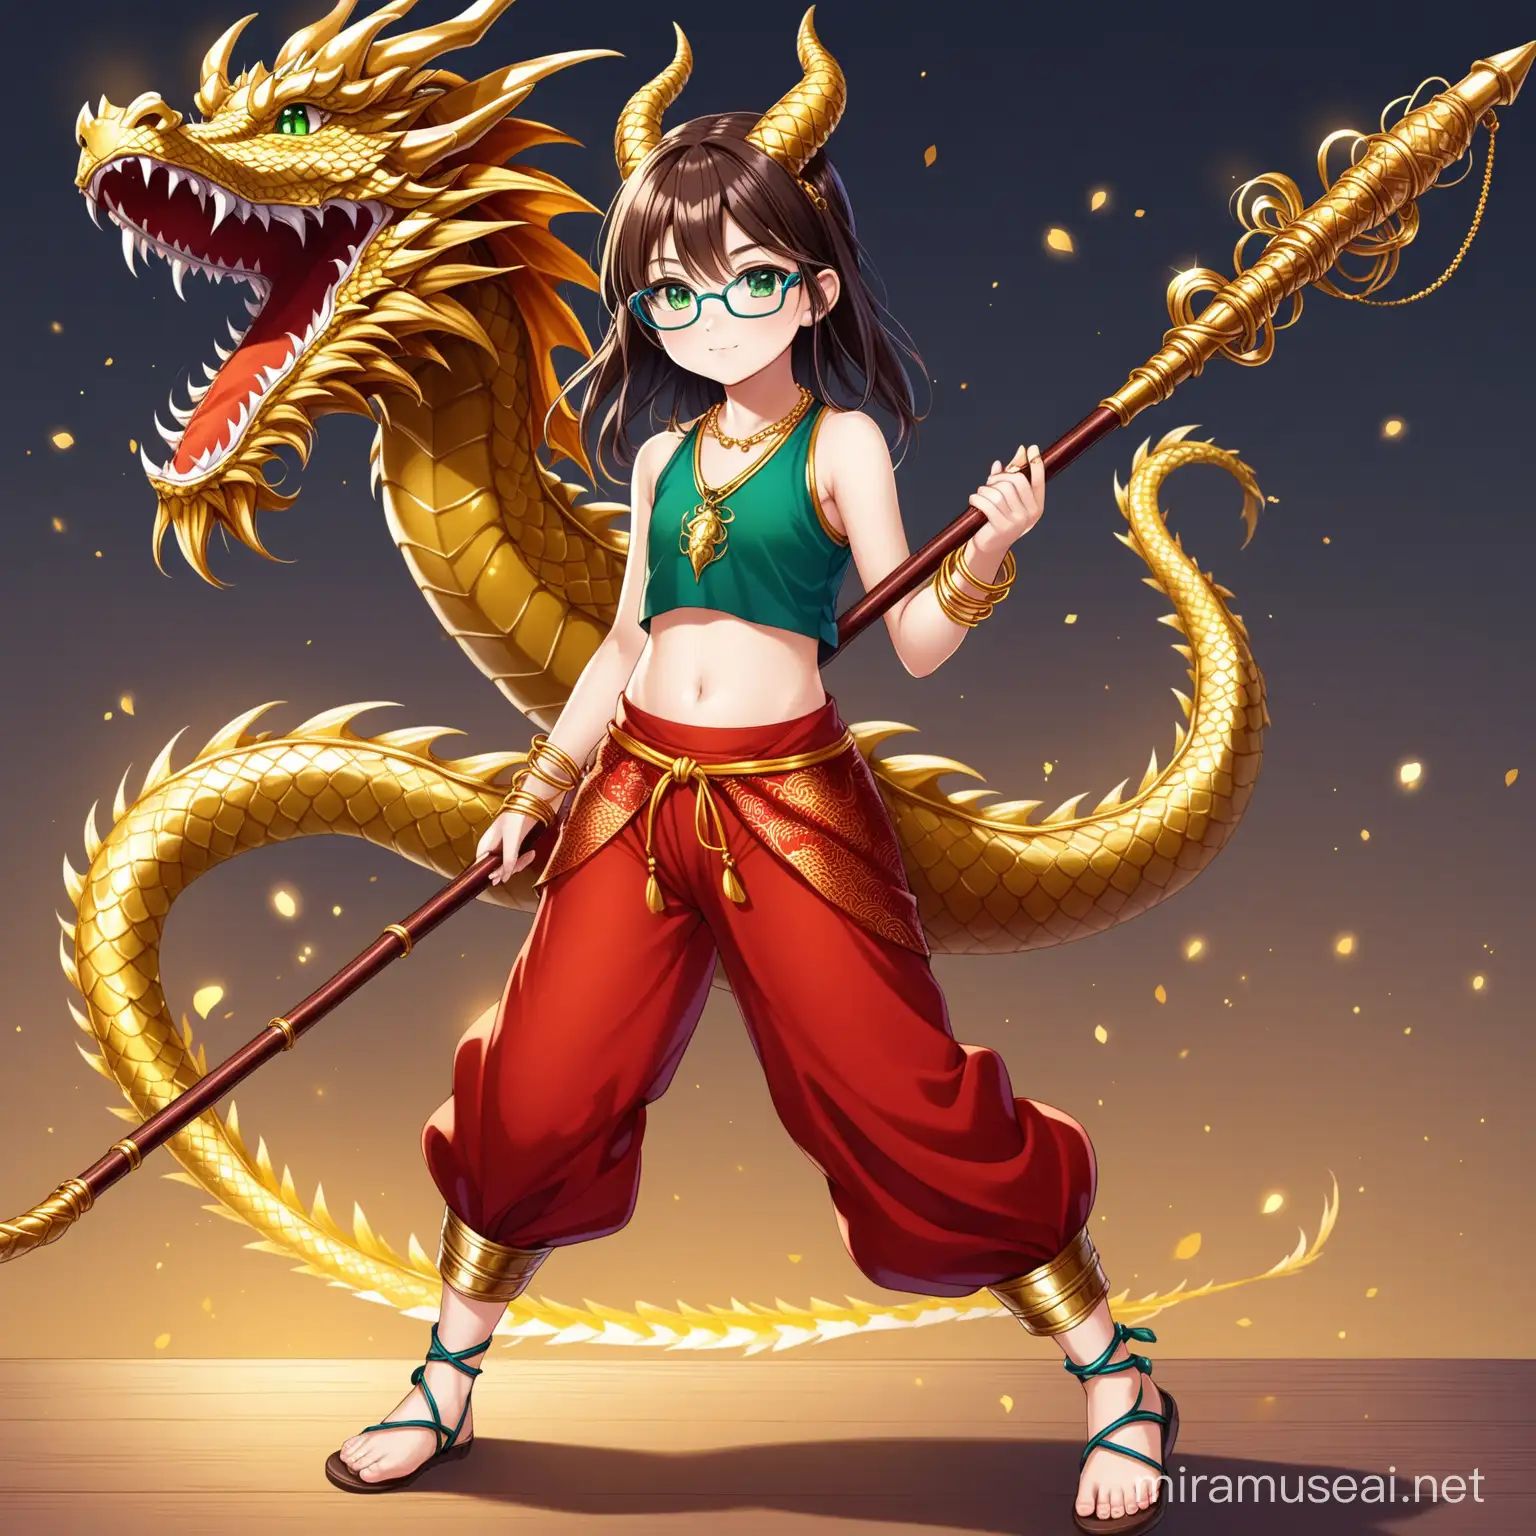 11 year old girl, brown hair with a streak of gold, green eyes, dark blue glasses, gold dragon ear cuffs, gold dragon bangles, gold dragon necklace, deep red crop top, deep red harem pants, black laced up boots, gold dragon anklet, a wooden staff,